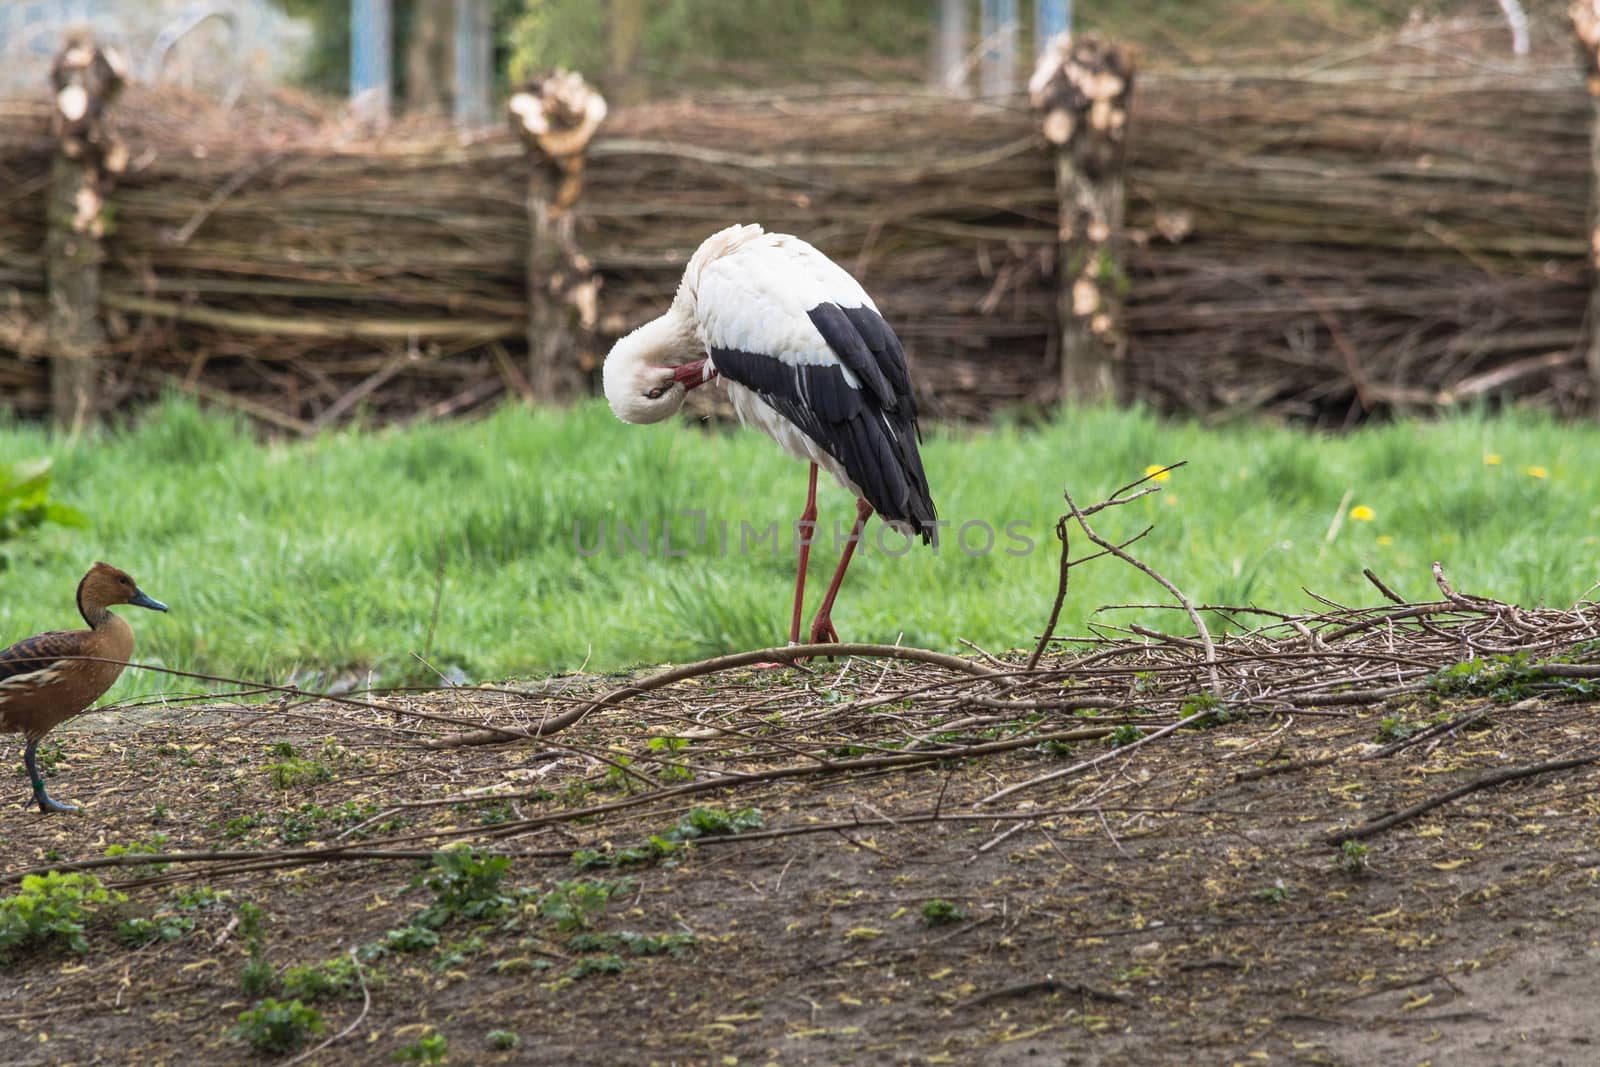 Adult Stork in nature by JFsPic